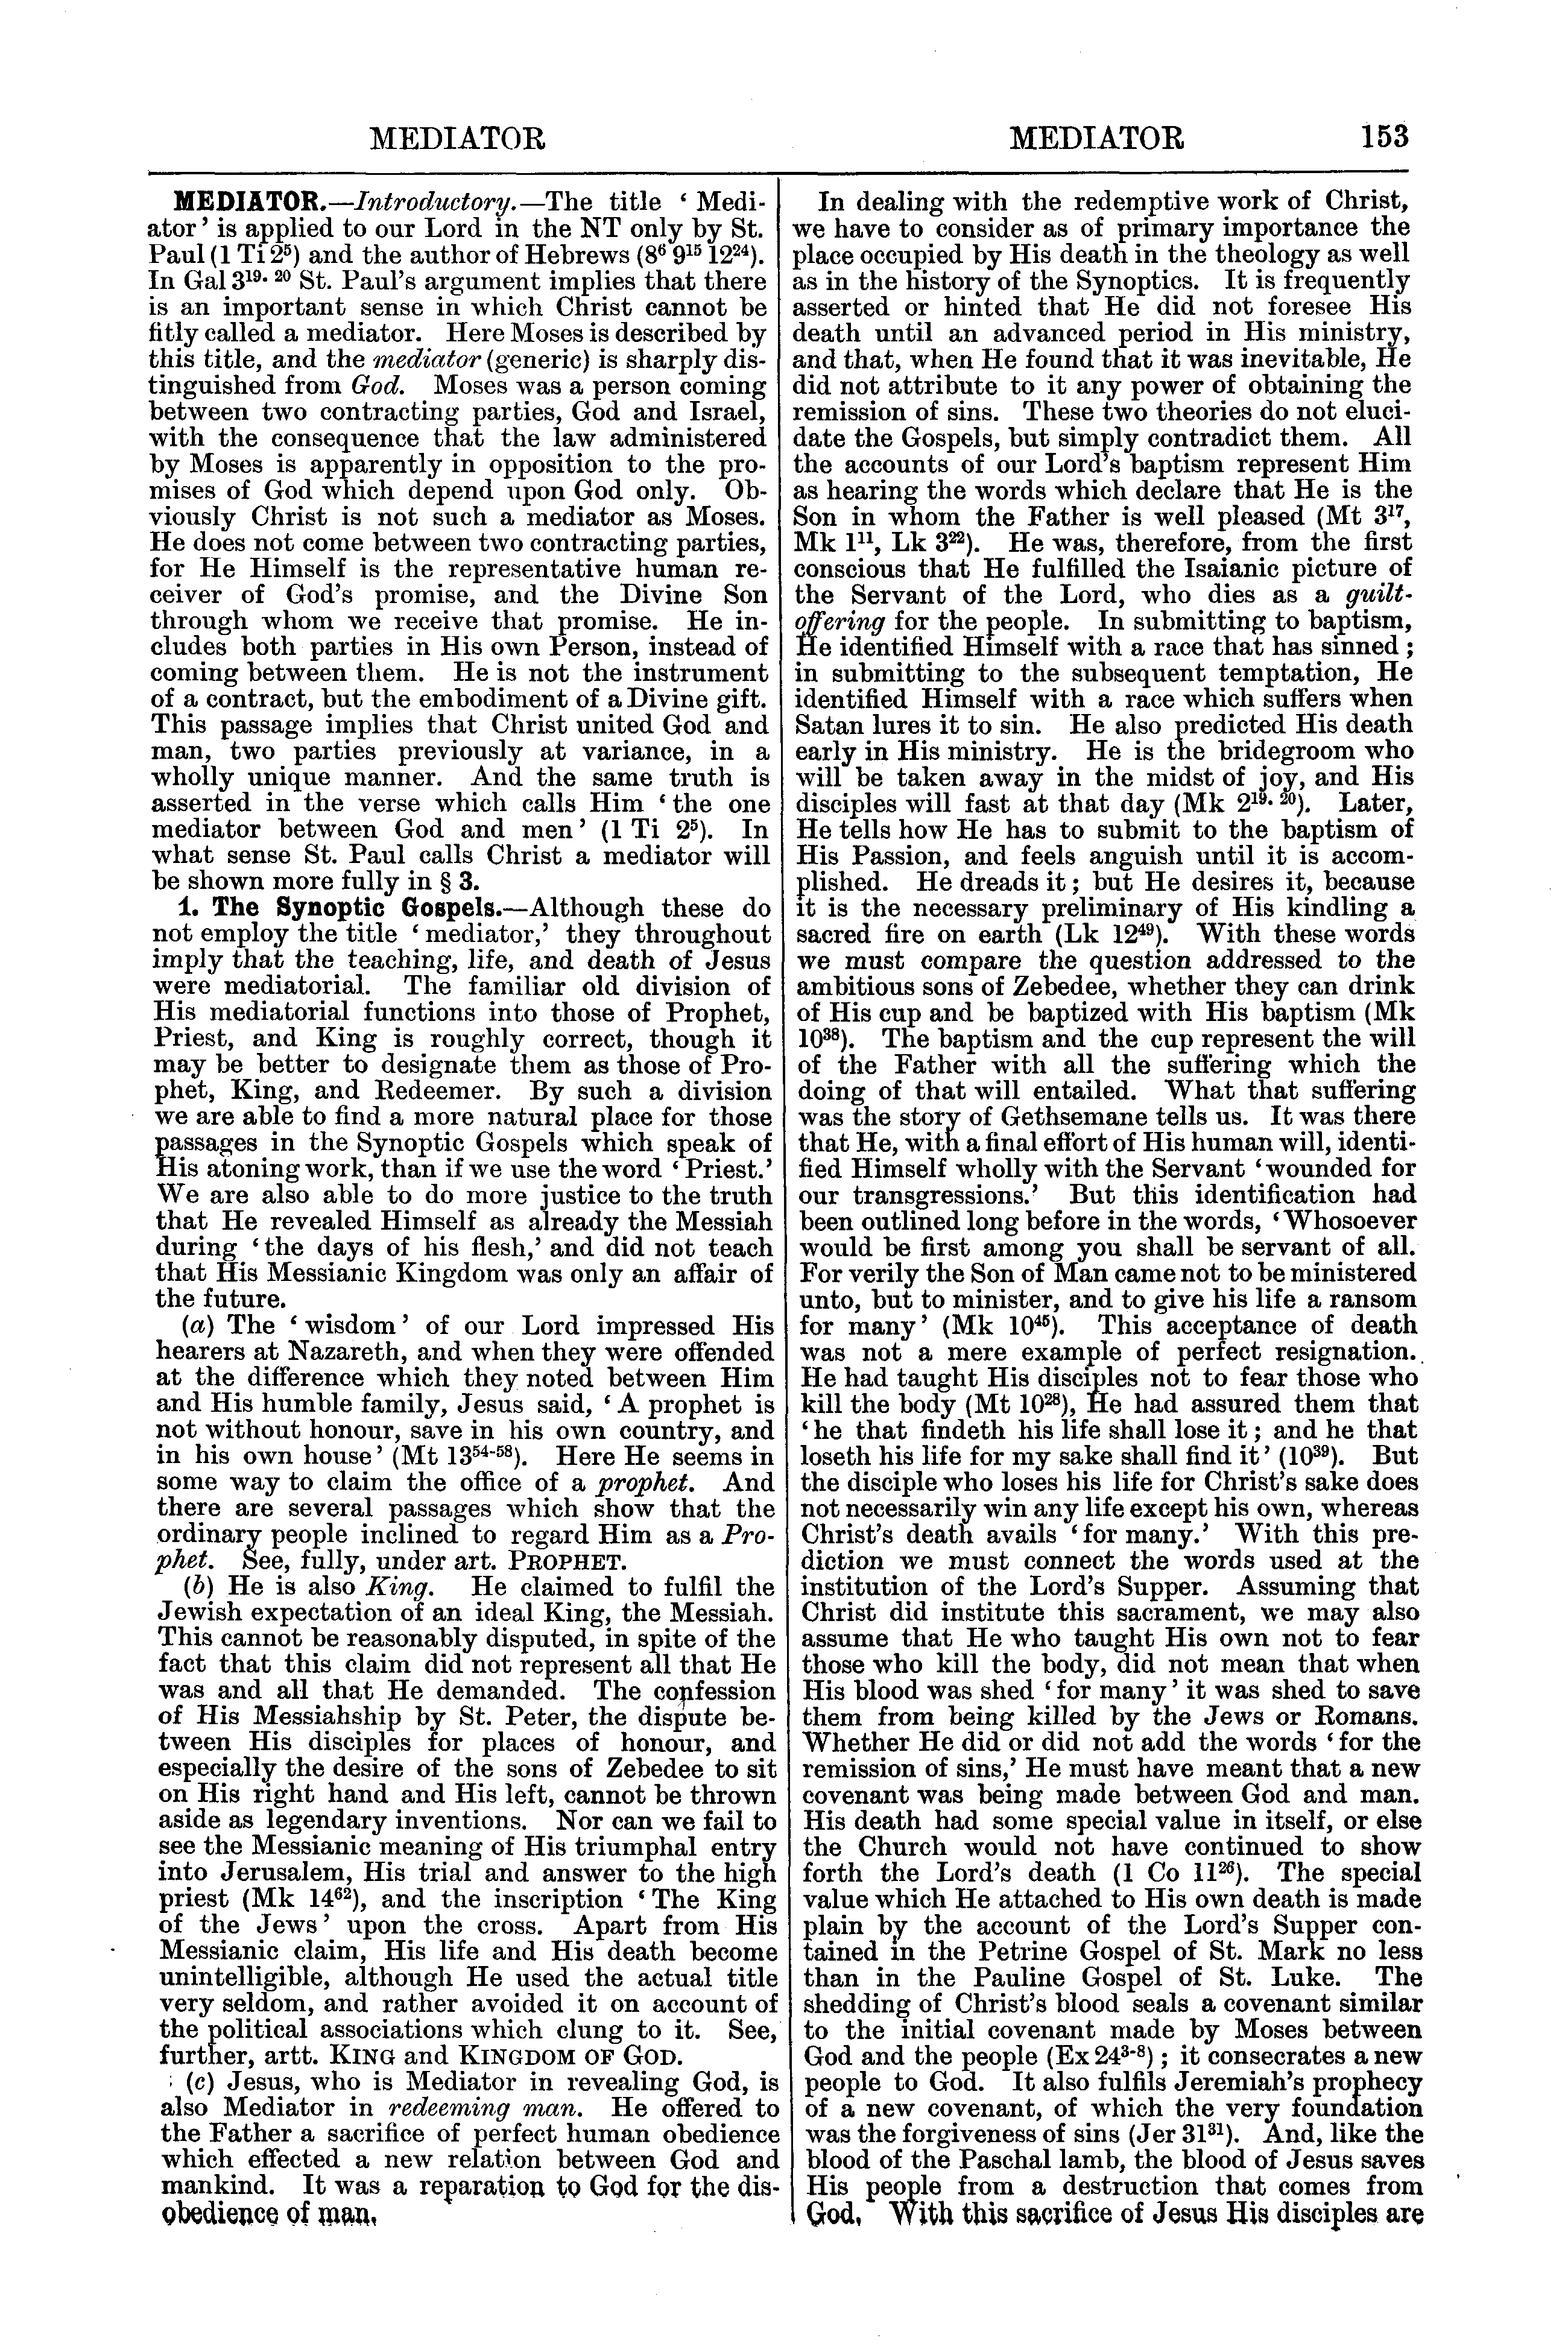 Image of page 153